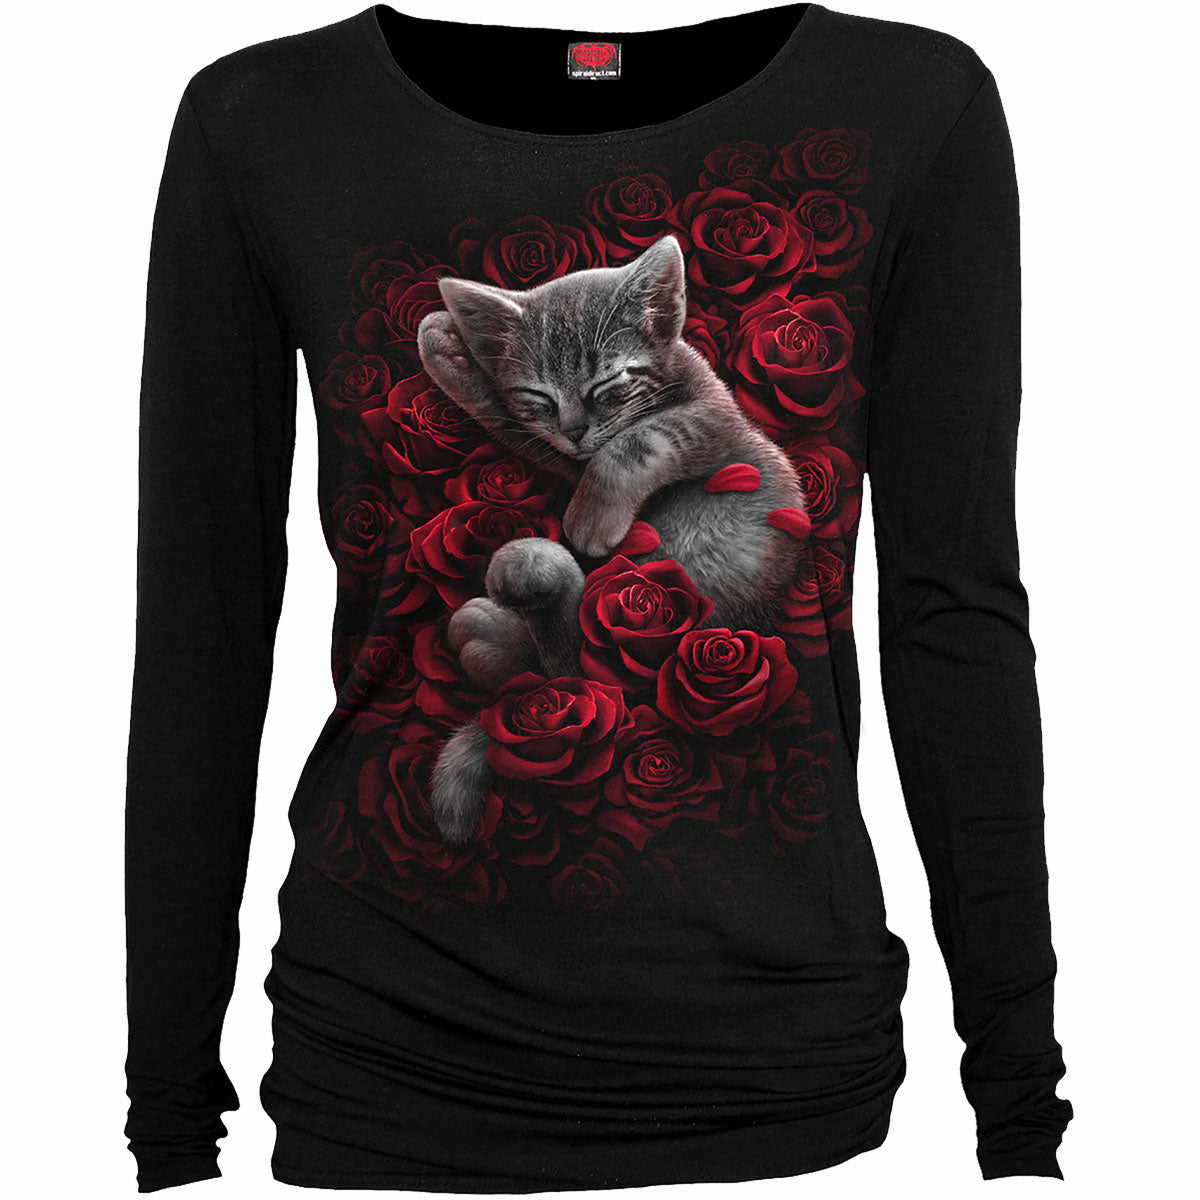 BED OF ROSES - Baggy Top Black